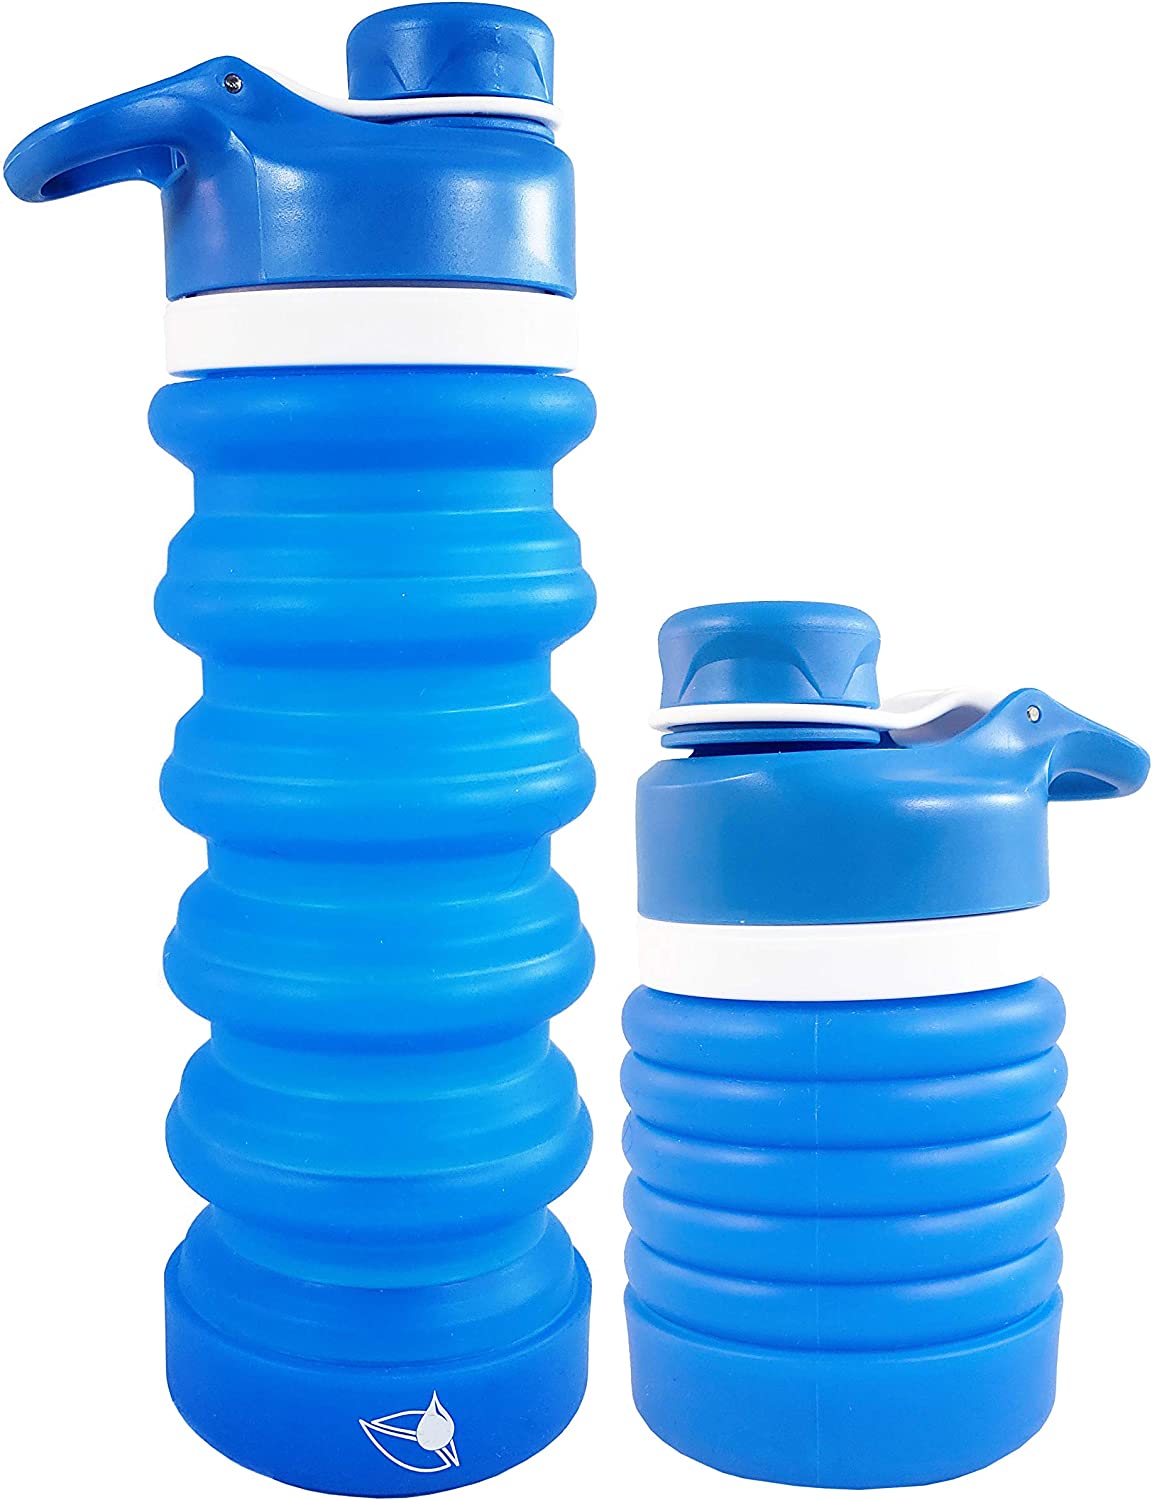 NatraCure Collapsible Water Bottle, BPA-free